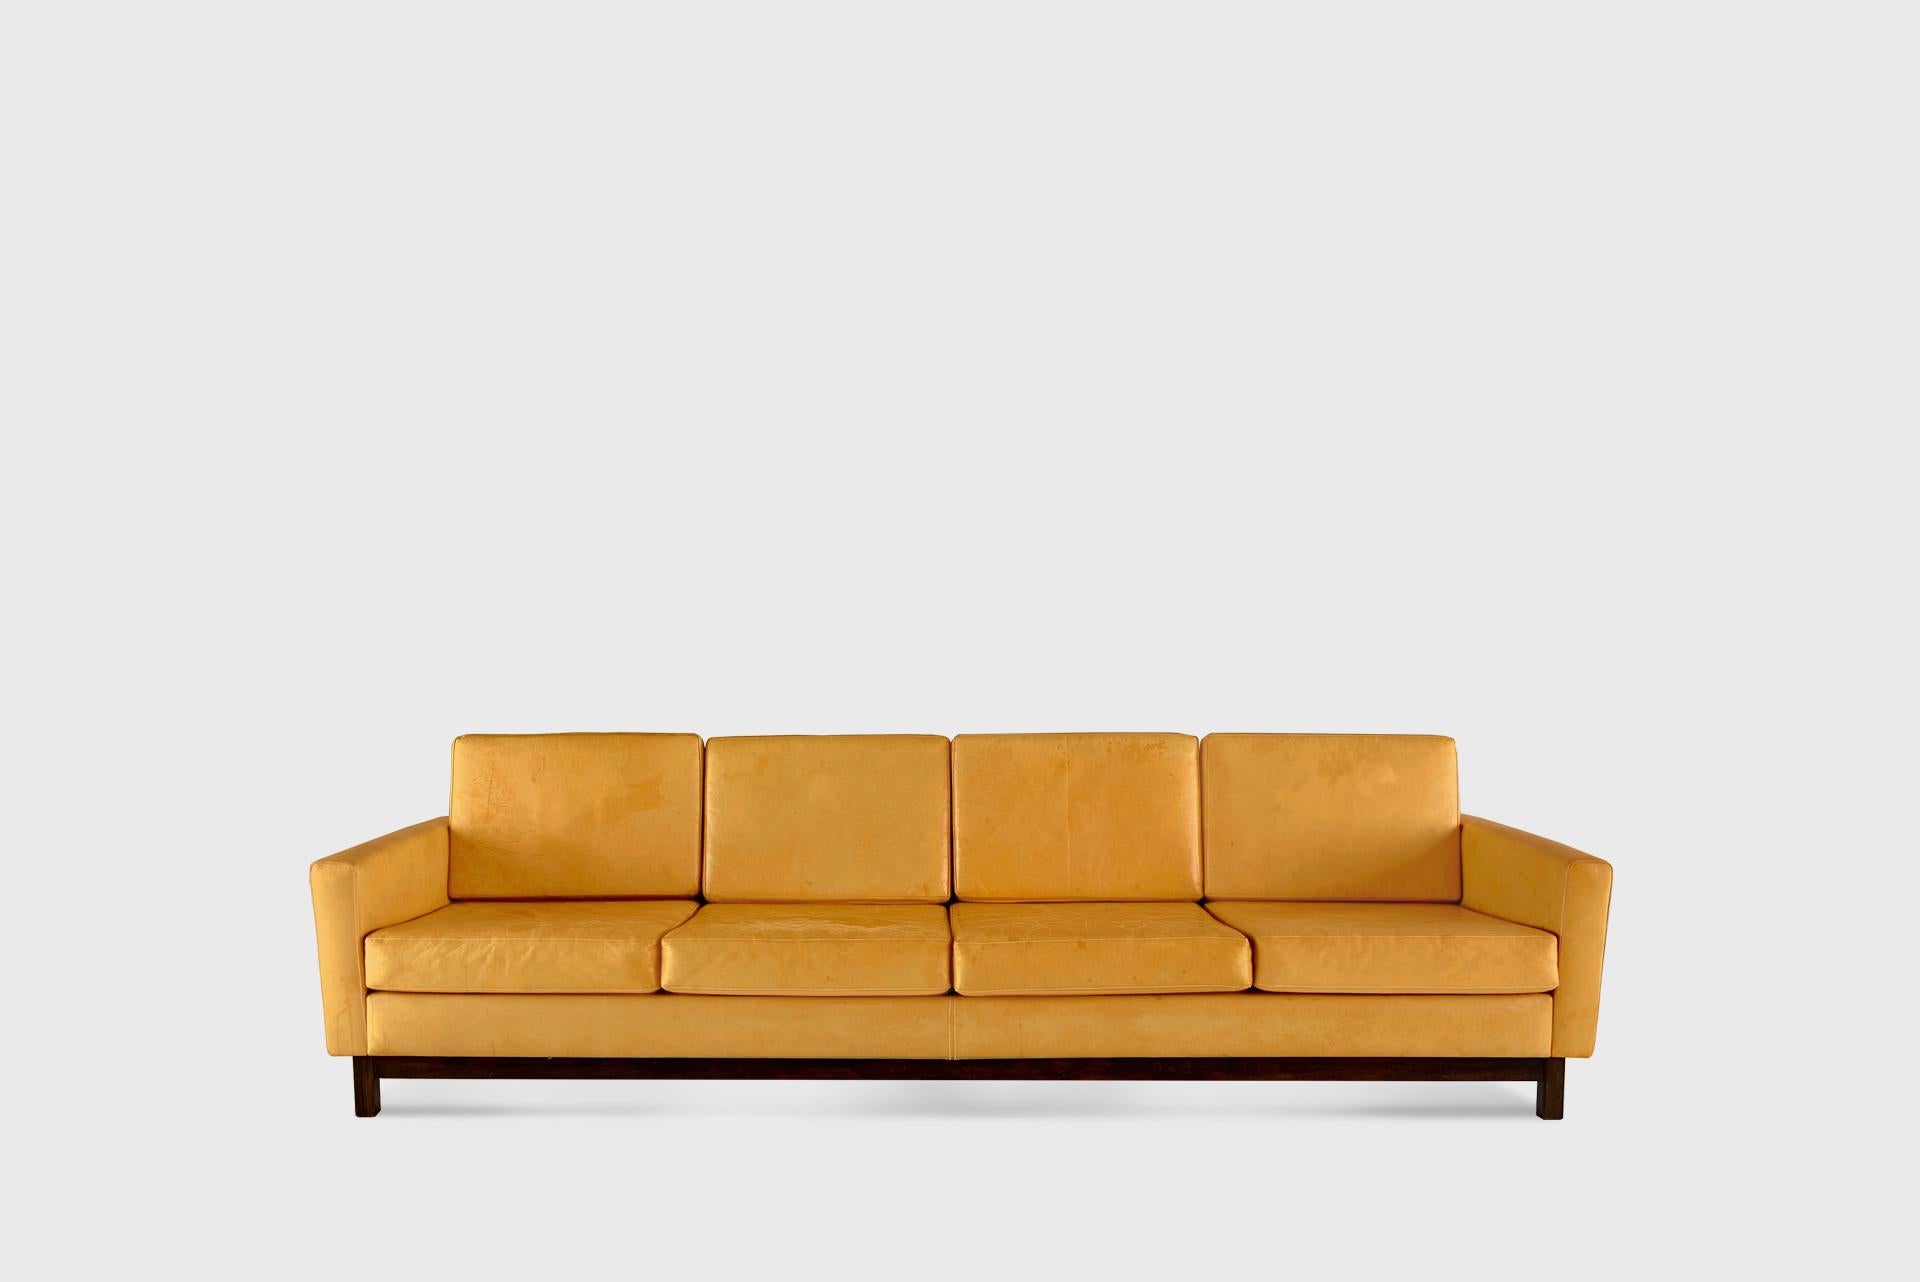 Anacastro Sofa
Manufactured by Oca
Brazil, 1960s
Jacaranda and natural leather

Measurements
270 cm x 80 cm x 78 h cm (back)
106,3 in x 31,5 in x 30,7 h in (back)
270 cm x 80 cm x 42 h cm (seat)
106,3 in x 31,5 in x 16,5 h in (seat)